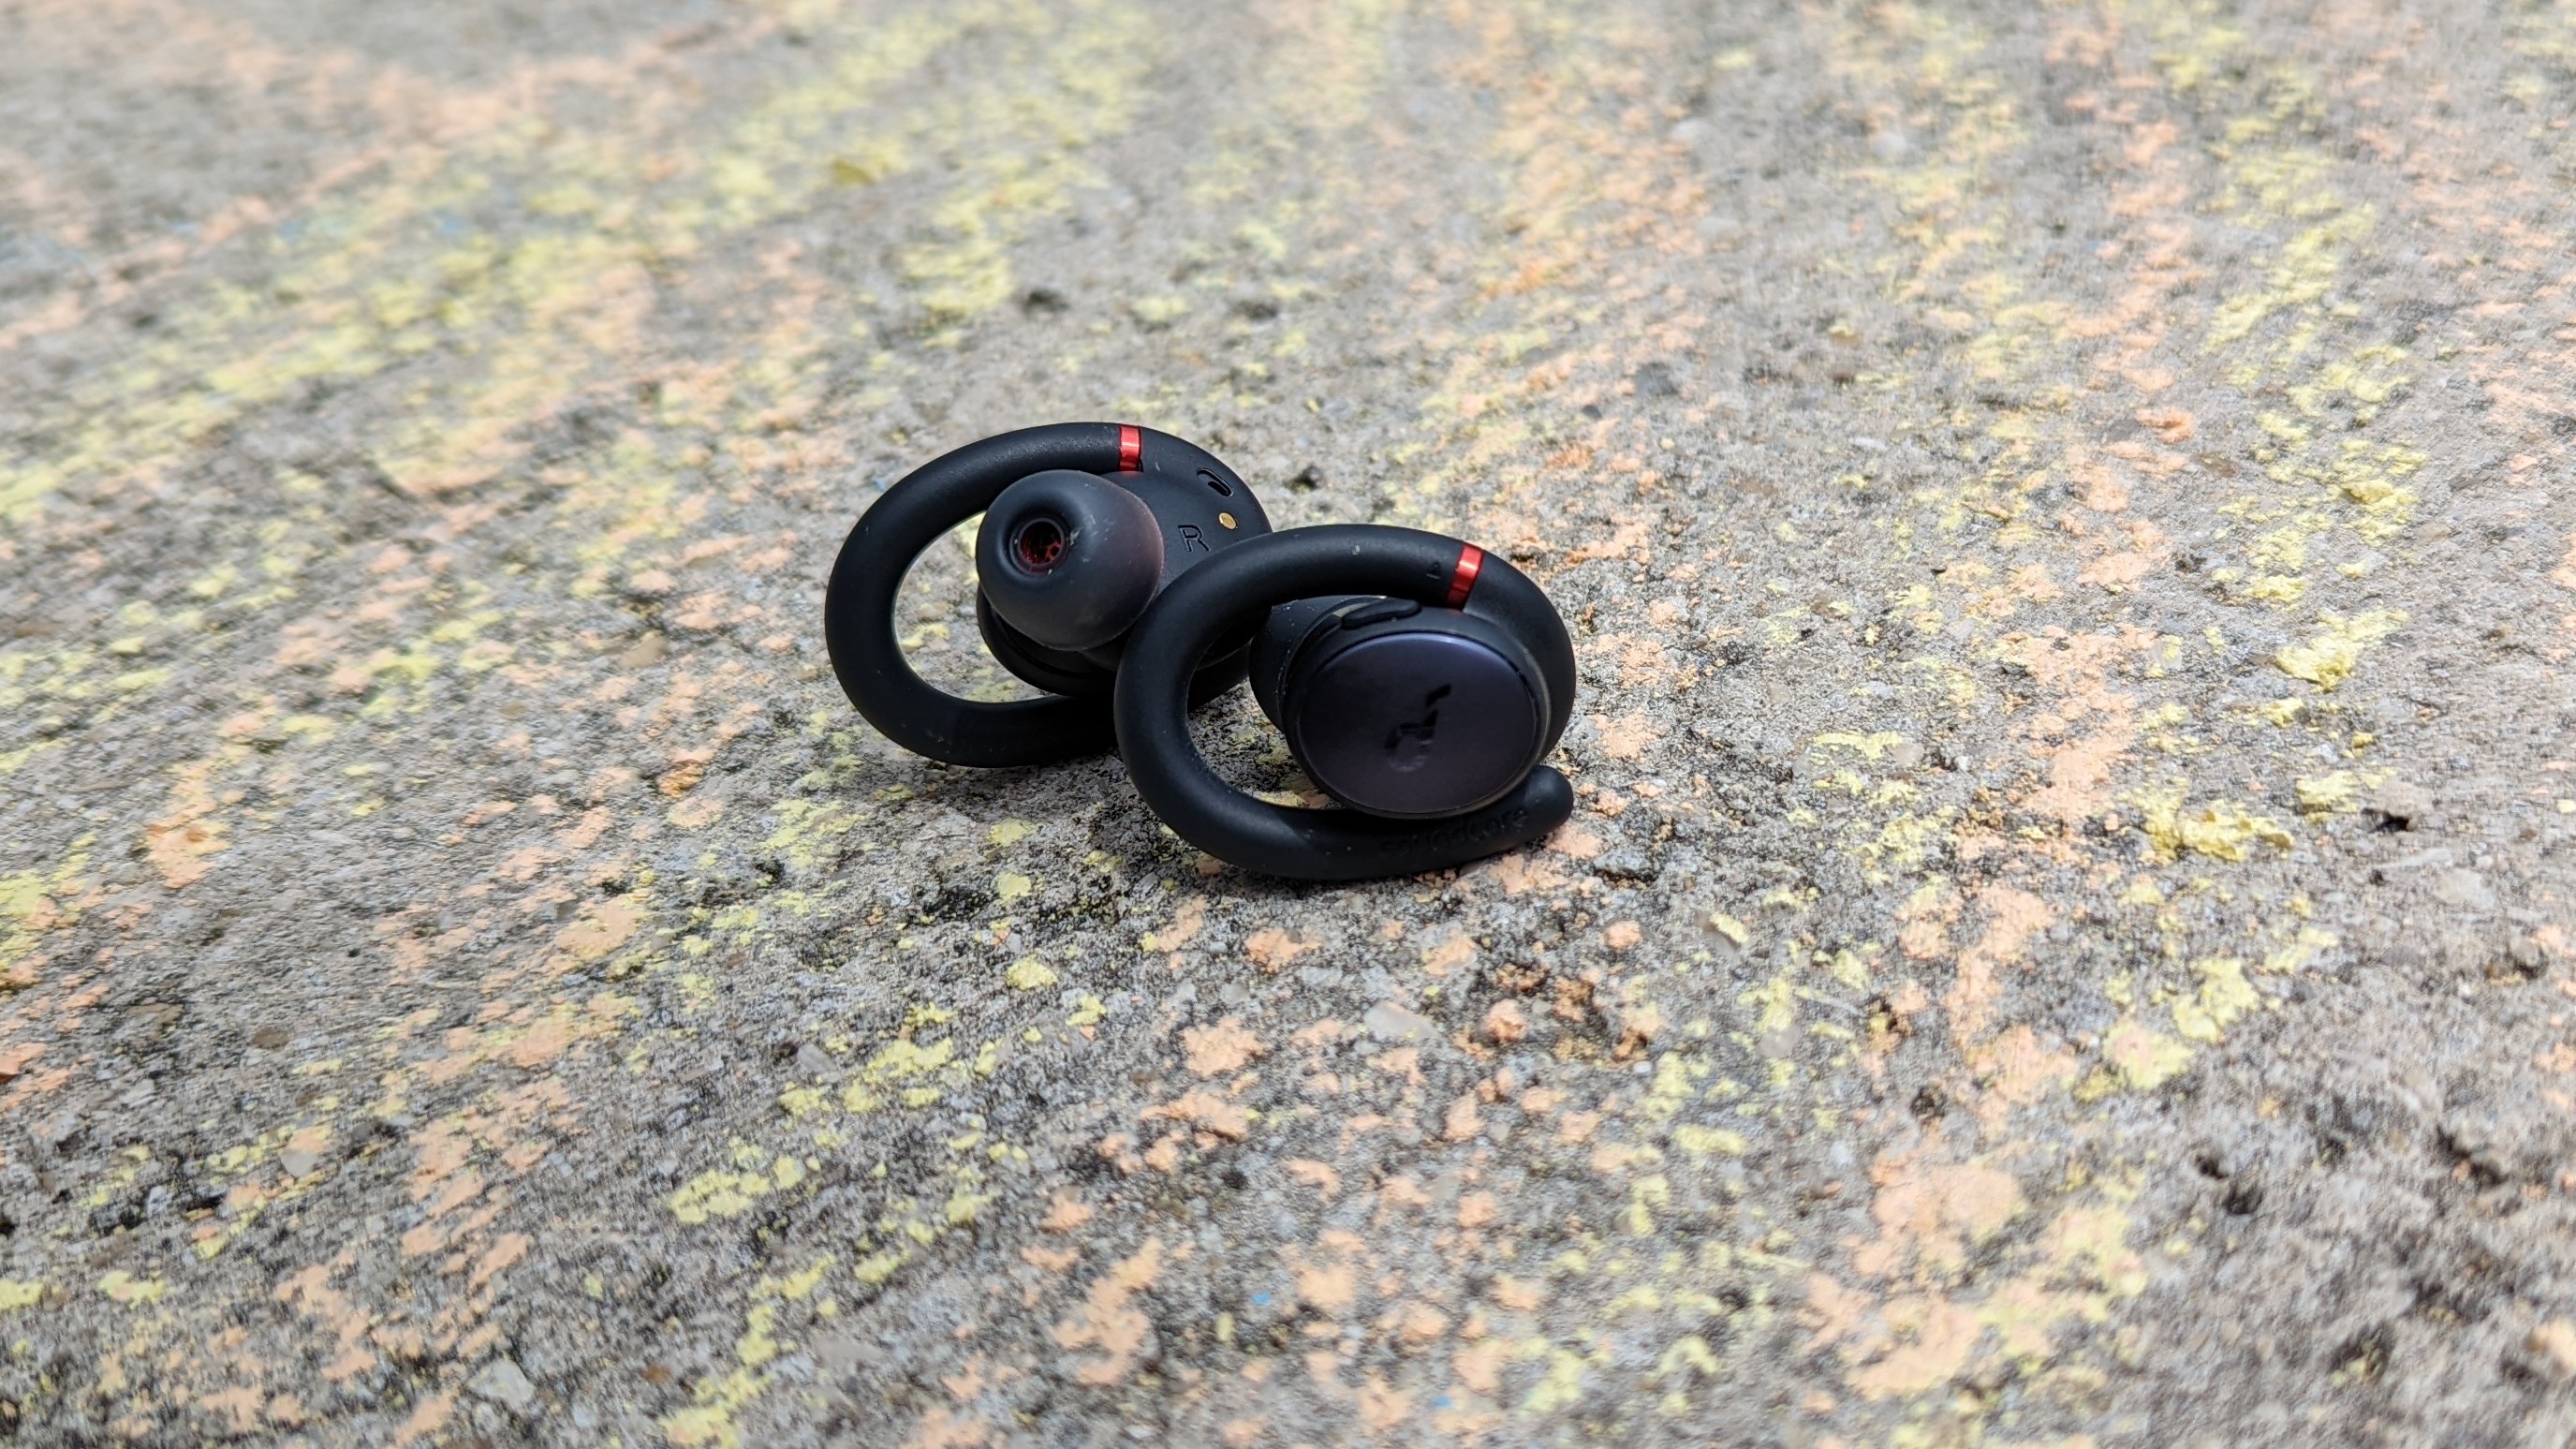 The Anker Soundcore Sport X10 wireless earbuds on the concrete